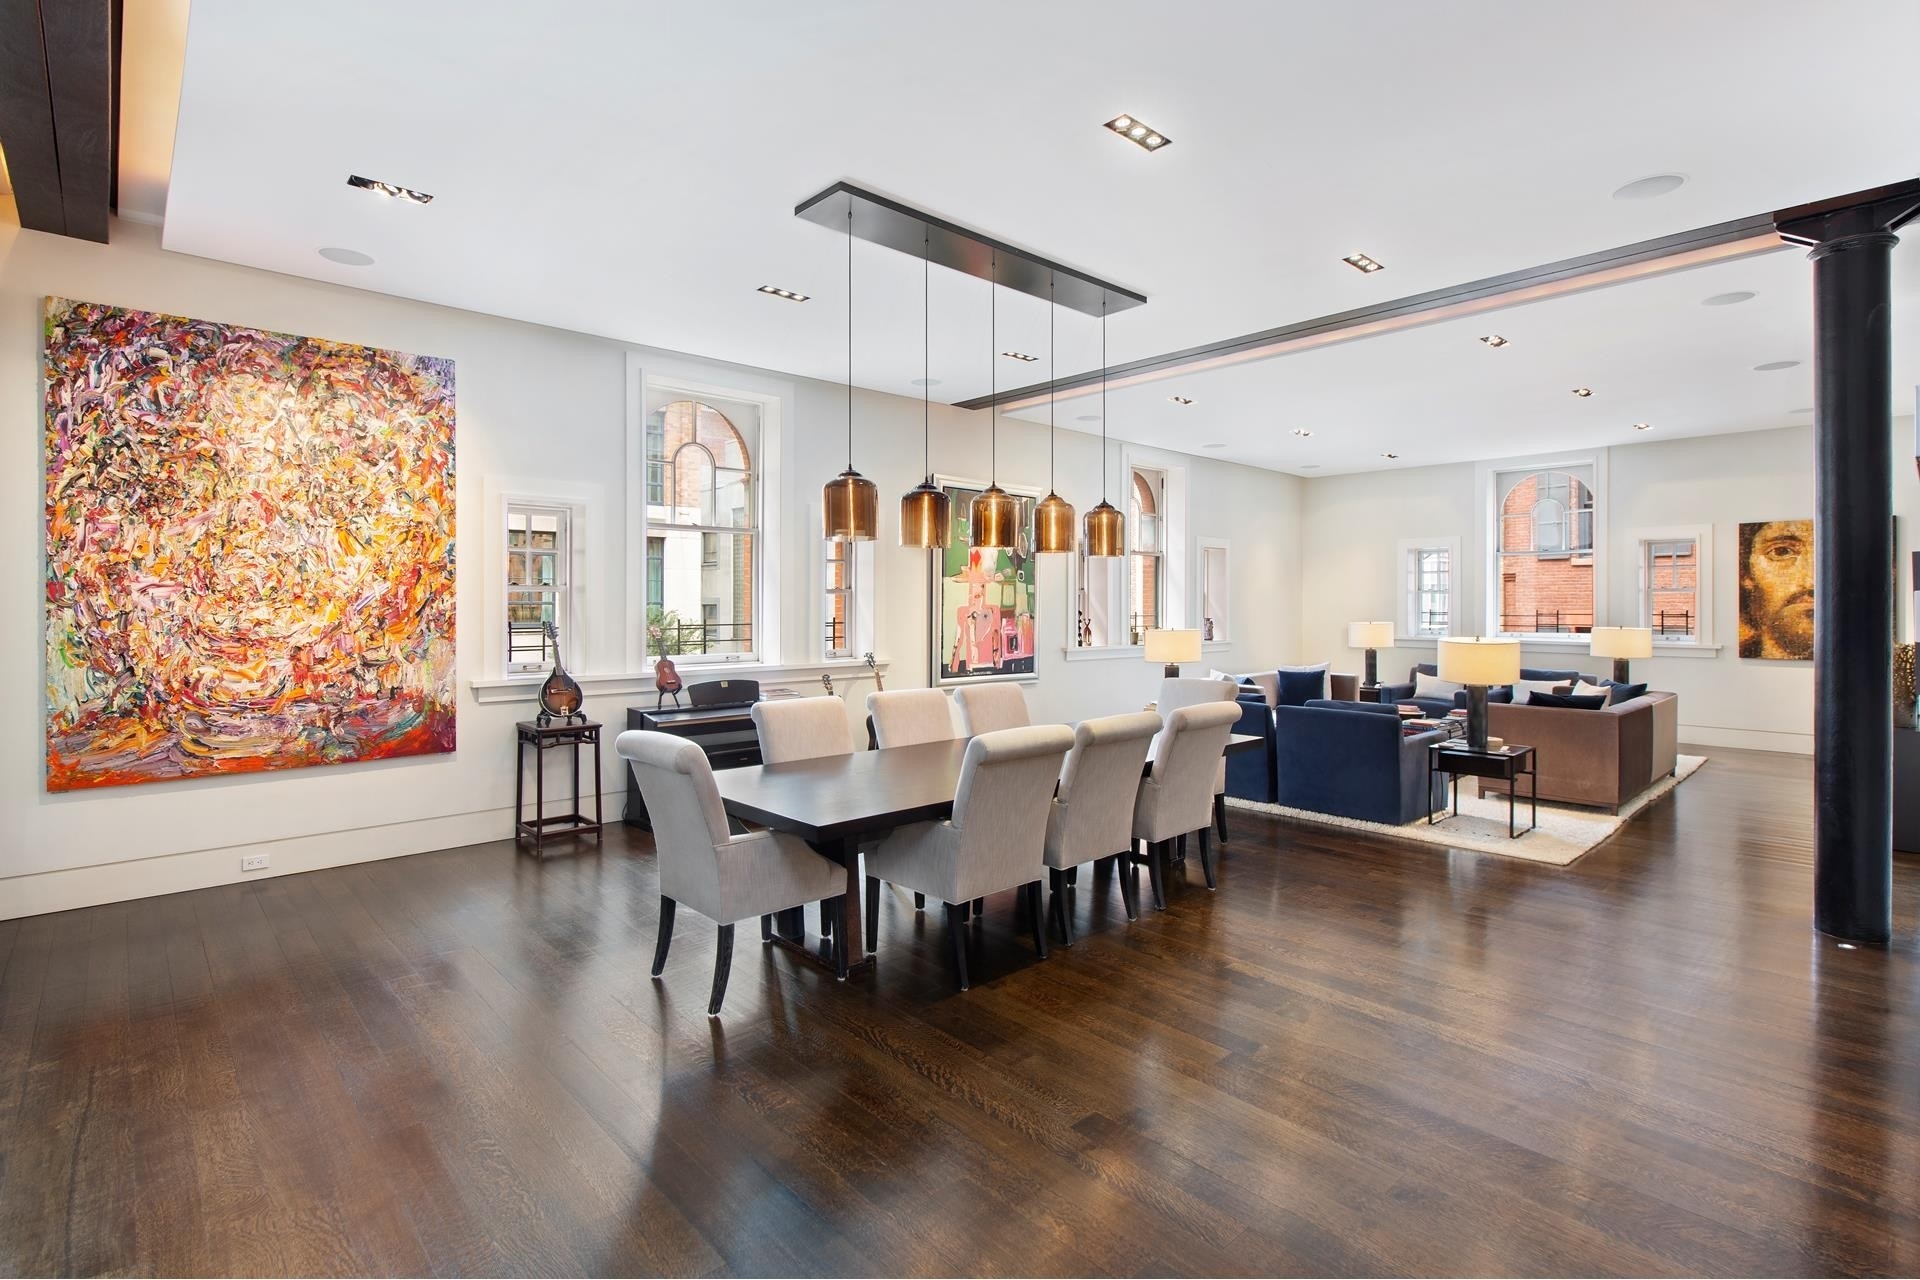 Condominium at Sixty Collister, 60 Collister St, 2A New York